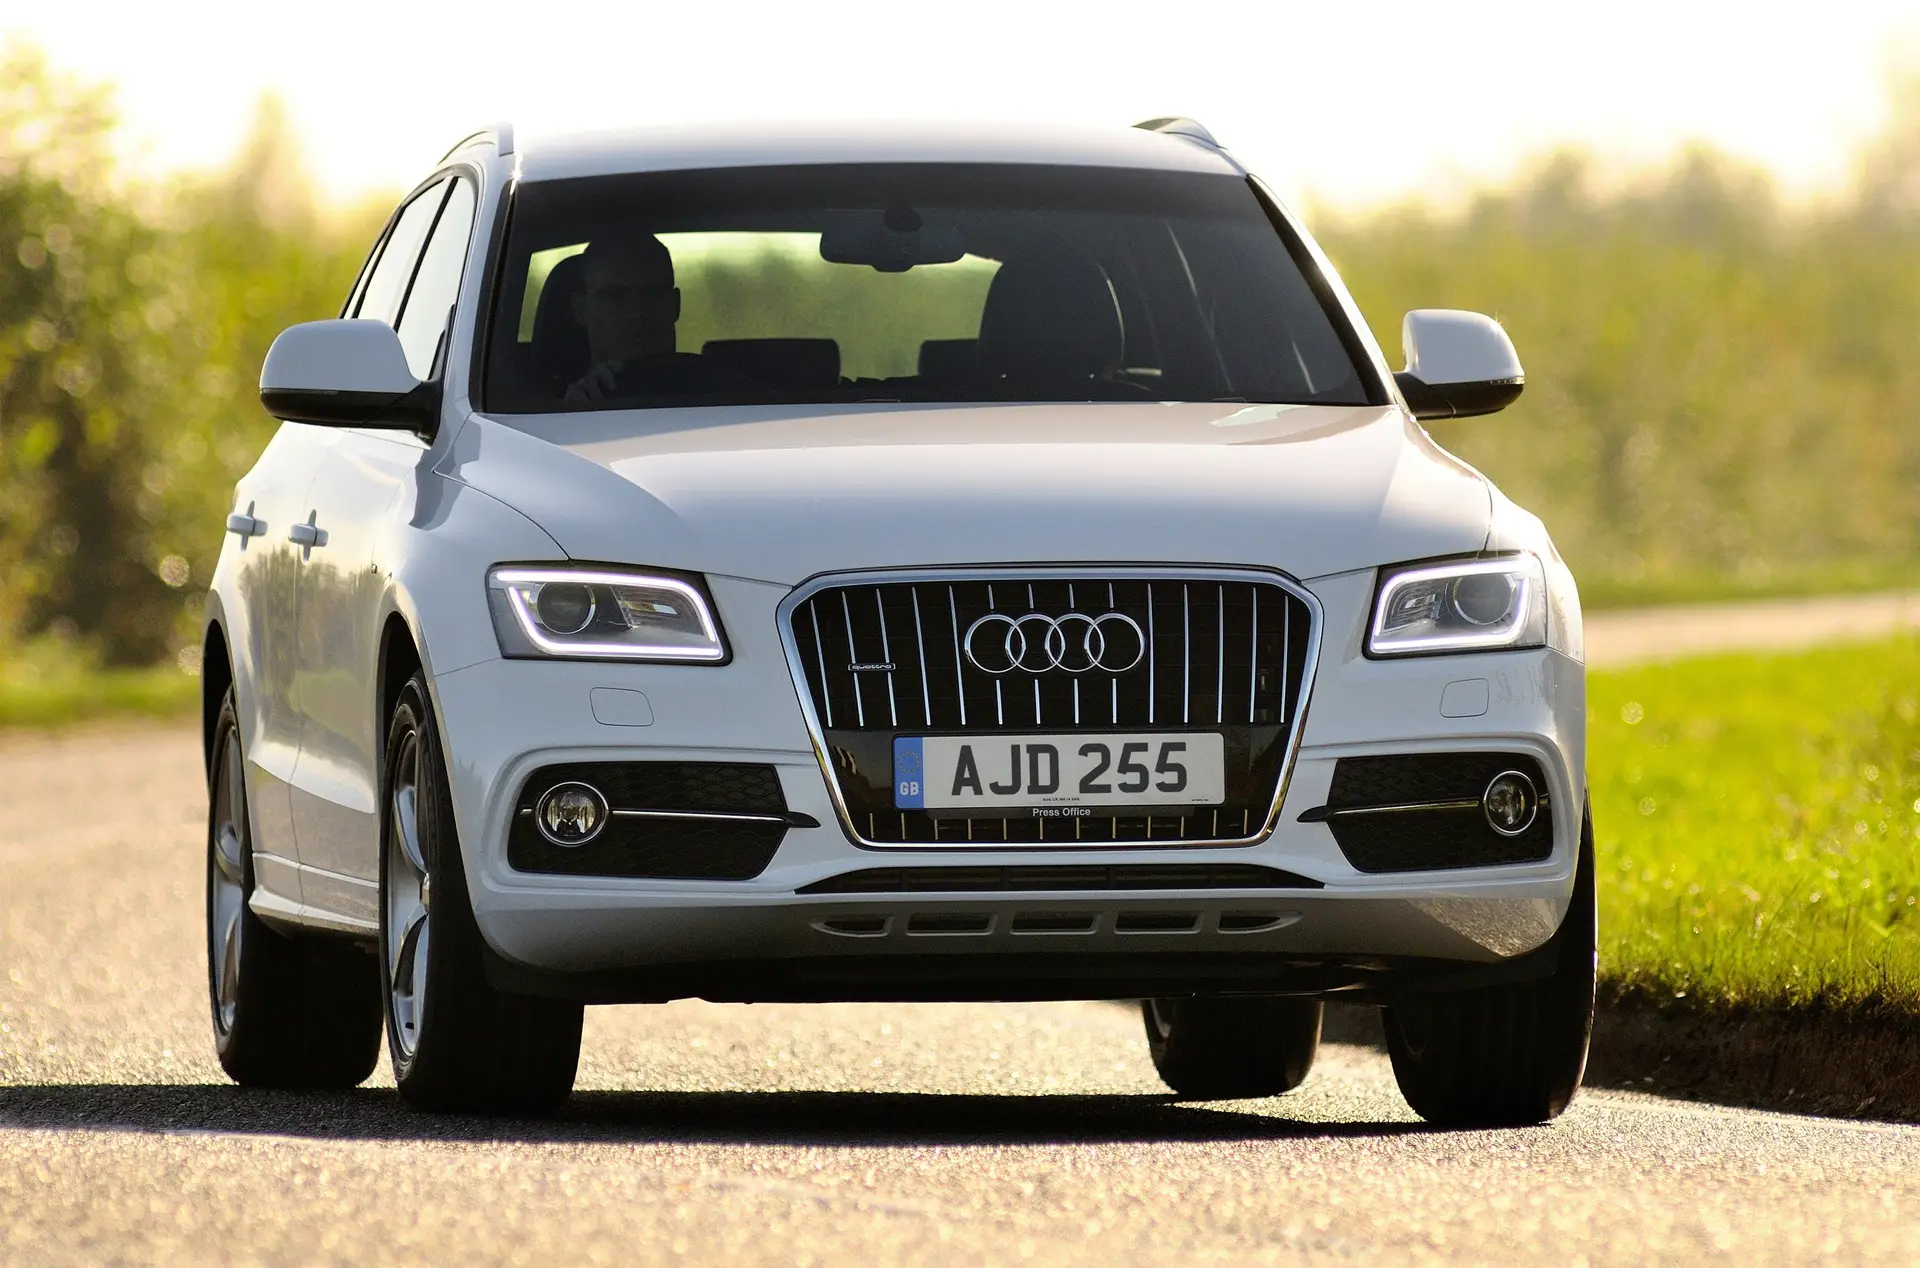 Audi Q5 (2008-2017) Review: exterior front three quarter photo of the Audi Q5 on the road